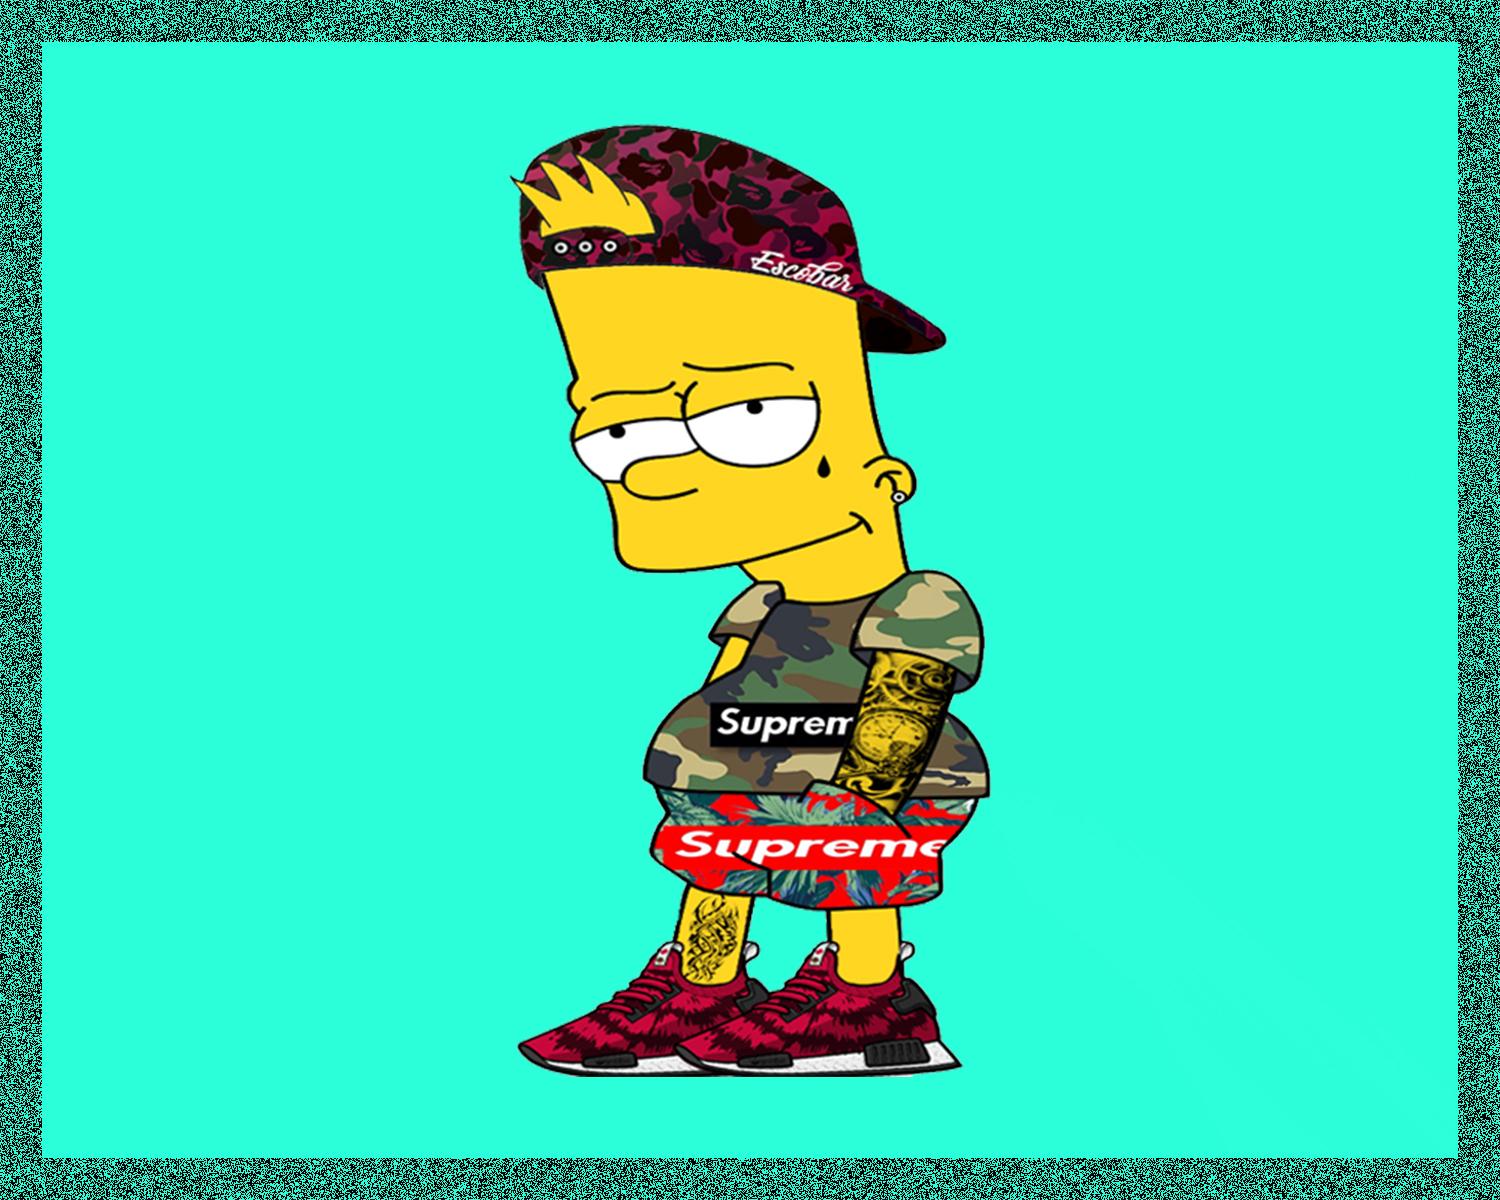 Supreme Wallpaper With Bart Simpson  Bart Simpson Supreme Gucci PngCool  Png Backgrounds  free transparent png images  pngaaacom